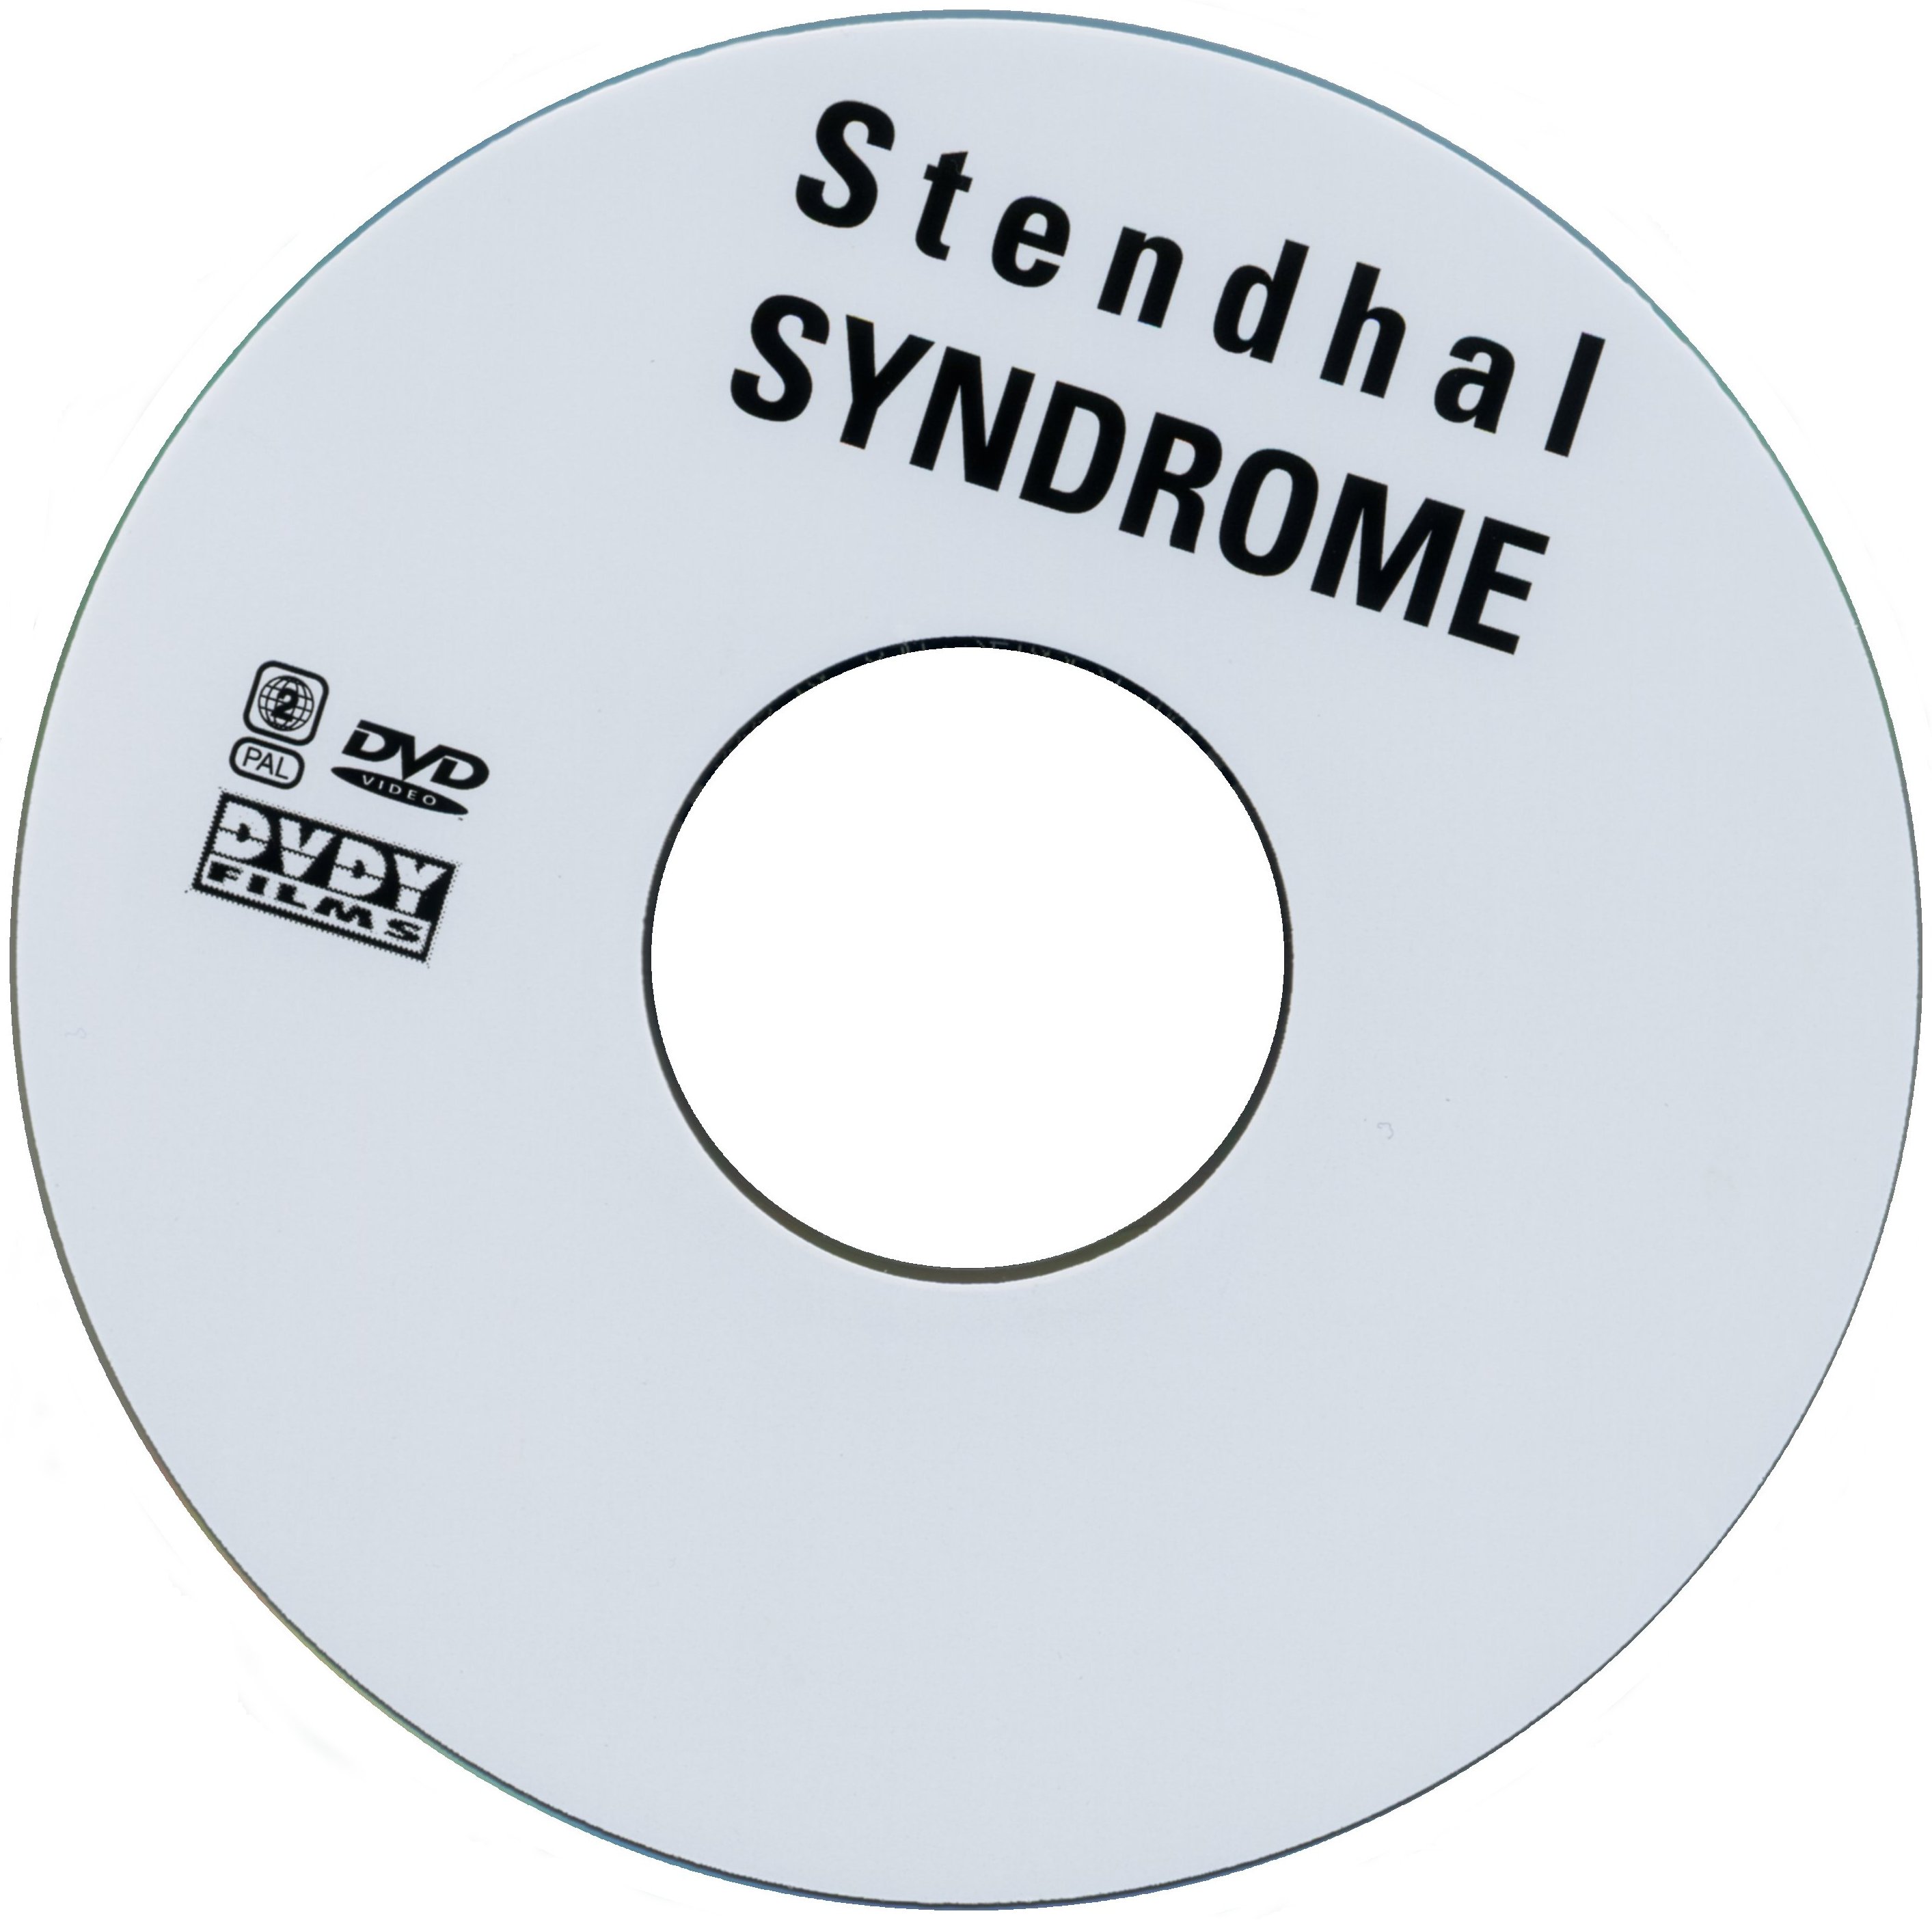 Stendhal syndrome